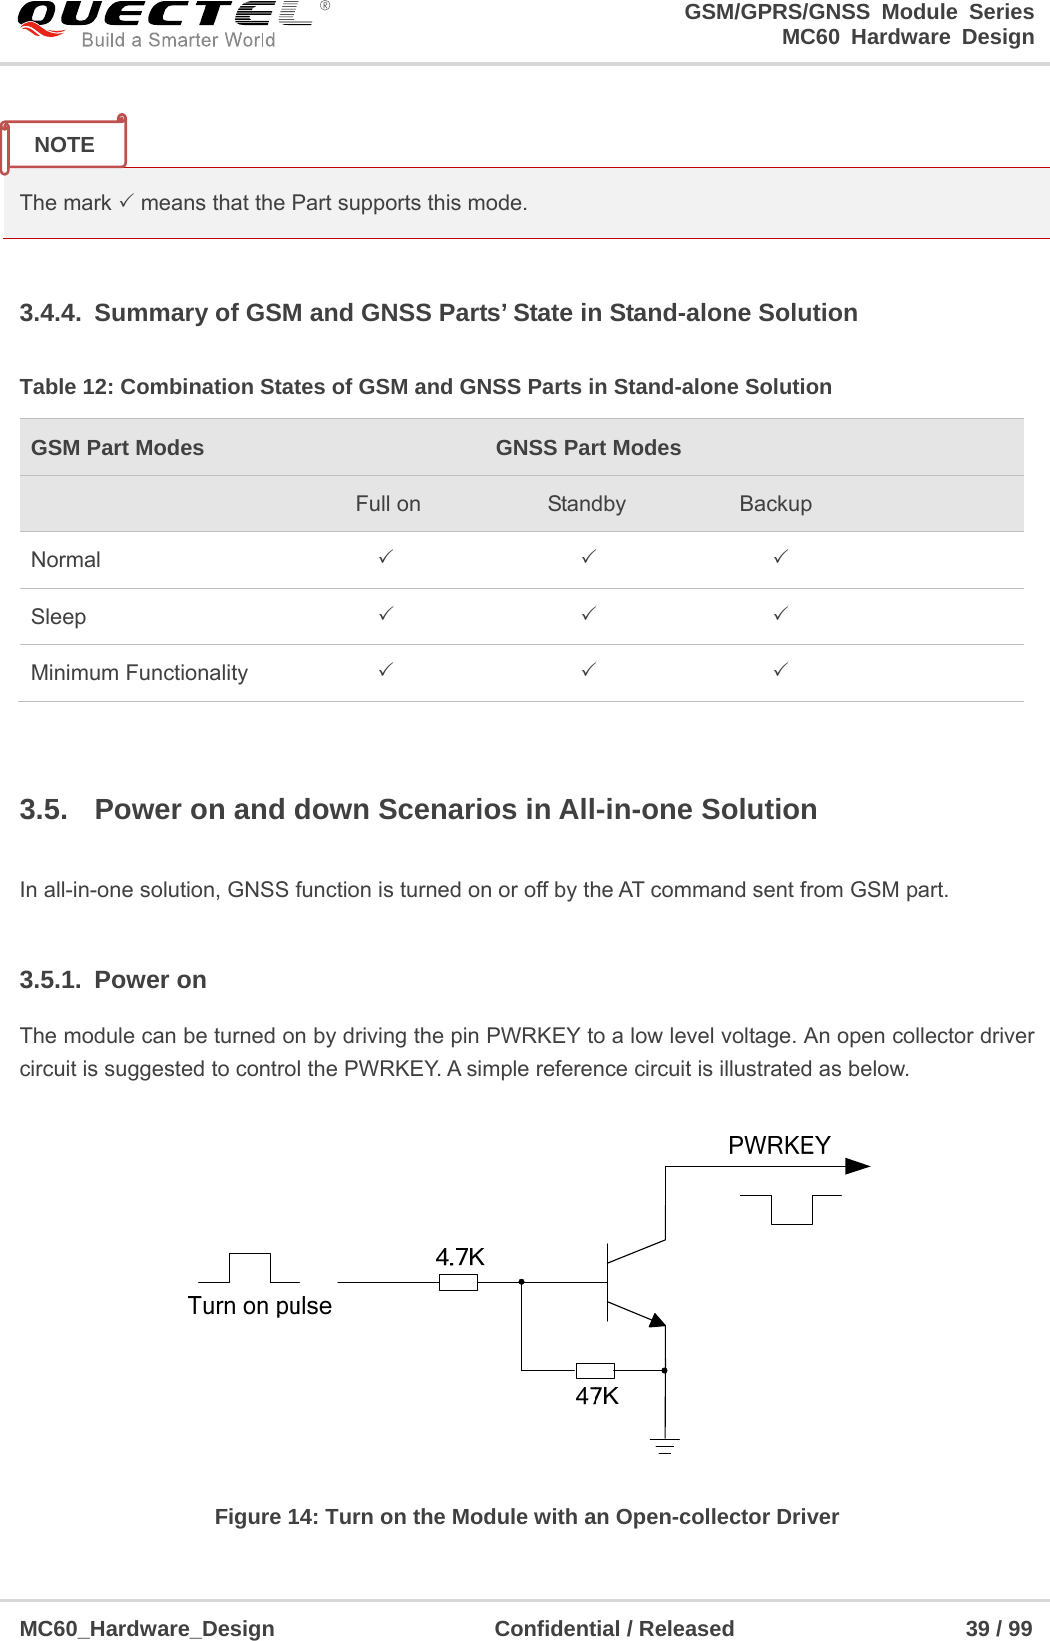                                                                     GSM/GPRS/GNSS Module Series                                                                 MC60 Hardware Design  MC60_Hardware_Design                    Confidential / Released                     39 / 99      The mark  means that the Part supports this mode.  3.4.4.  Summary of GSM and GNSS Parts’ State in Stand-alone Solution Table 12: Combination States of GSM and GNSS Parts in Stand-alone Solution GSM Part Modes  GNSS Part Modes    Full on    Standby  Backup Normal     Sleep       Minimum Functionality      3.5.  Power on and down Scenarios in All-in-one Solution  In all-in-one solution, GNSS function is turned on or off by the AT command sent from GSM part.  3.5.1. Power on The module can be turned on by driving the pin PWRKEY to a low level voltage. An open collector driver circuit is suggested to control the PWRKEY. A simple reference circuit is illustrated as below.    Figure 14: Turn on the Module with an Open-collector Driver NOTE 